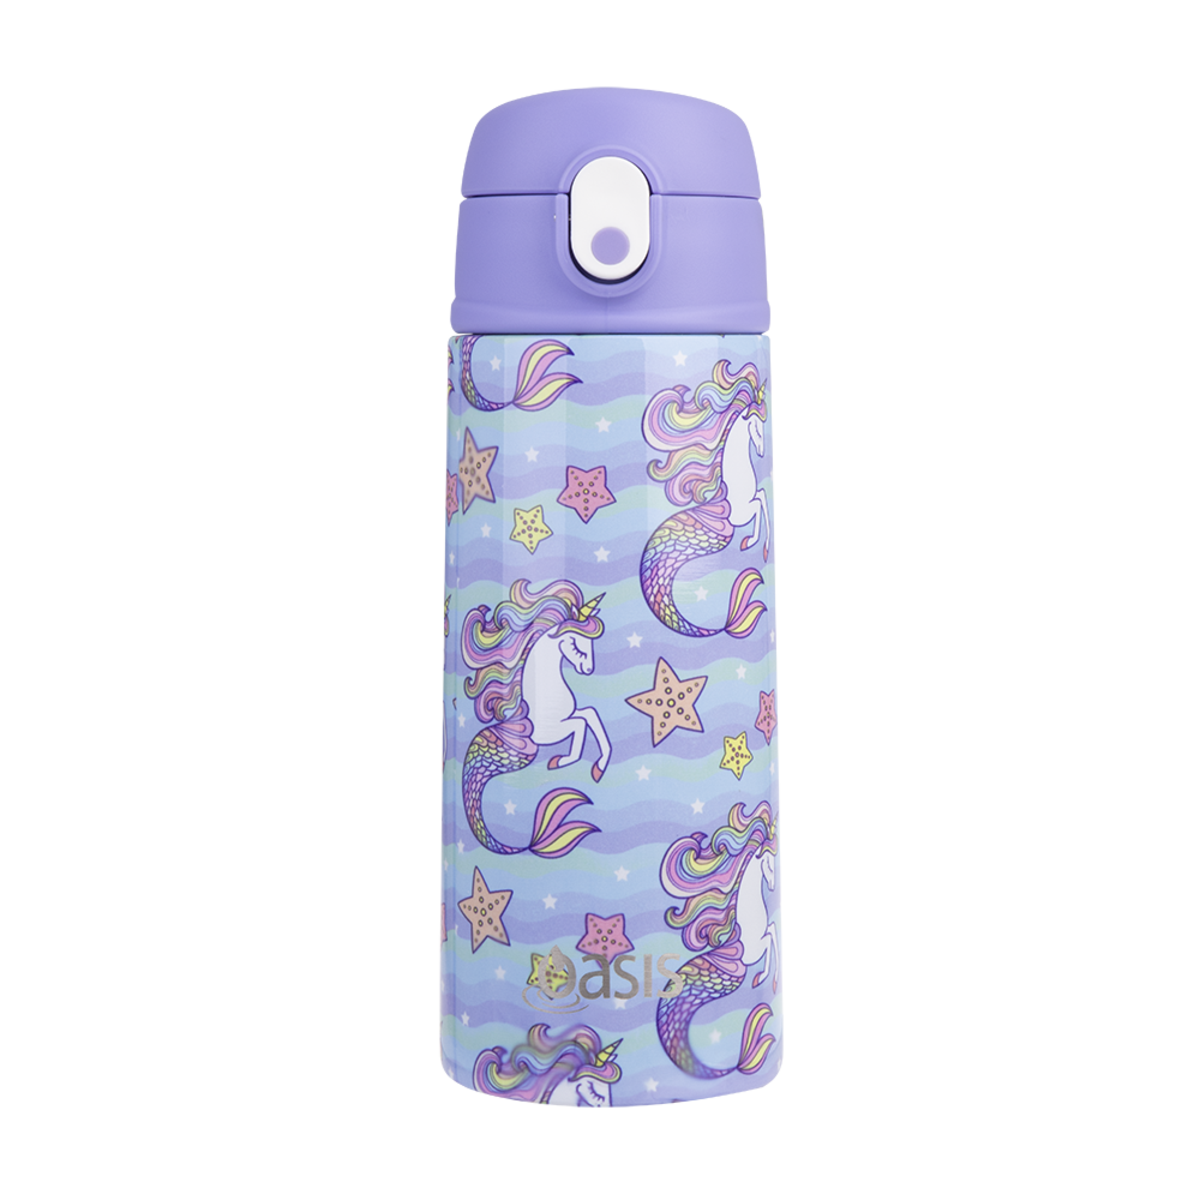 Oasis Stainless Steel Double Wall Insulated Kids Drink Bottle w Sipper 550ml Mermaid Unicorns